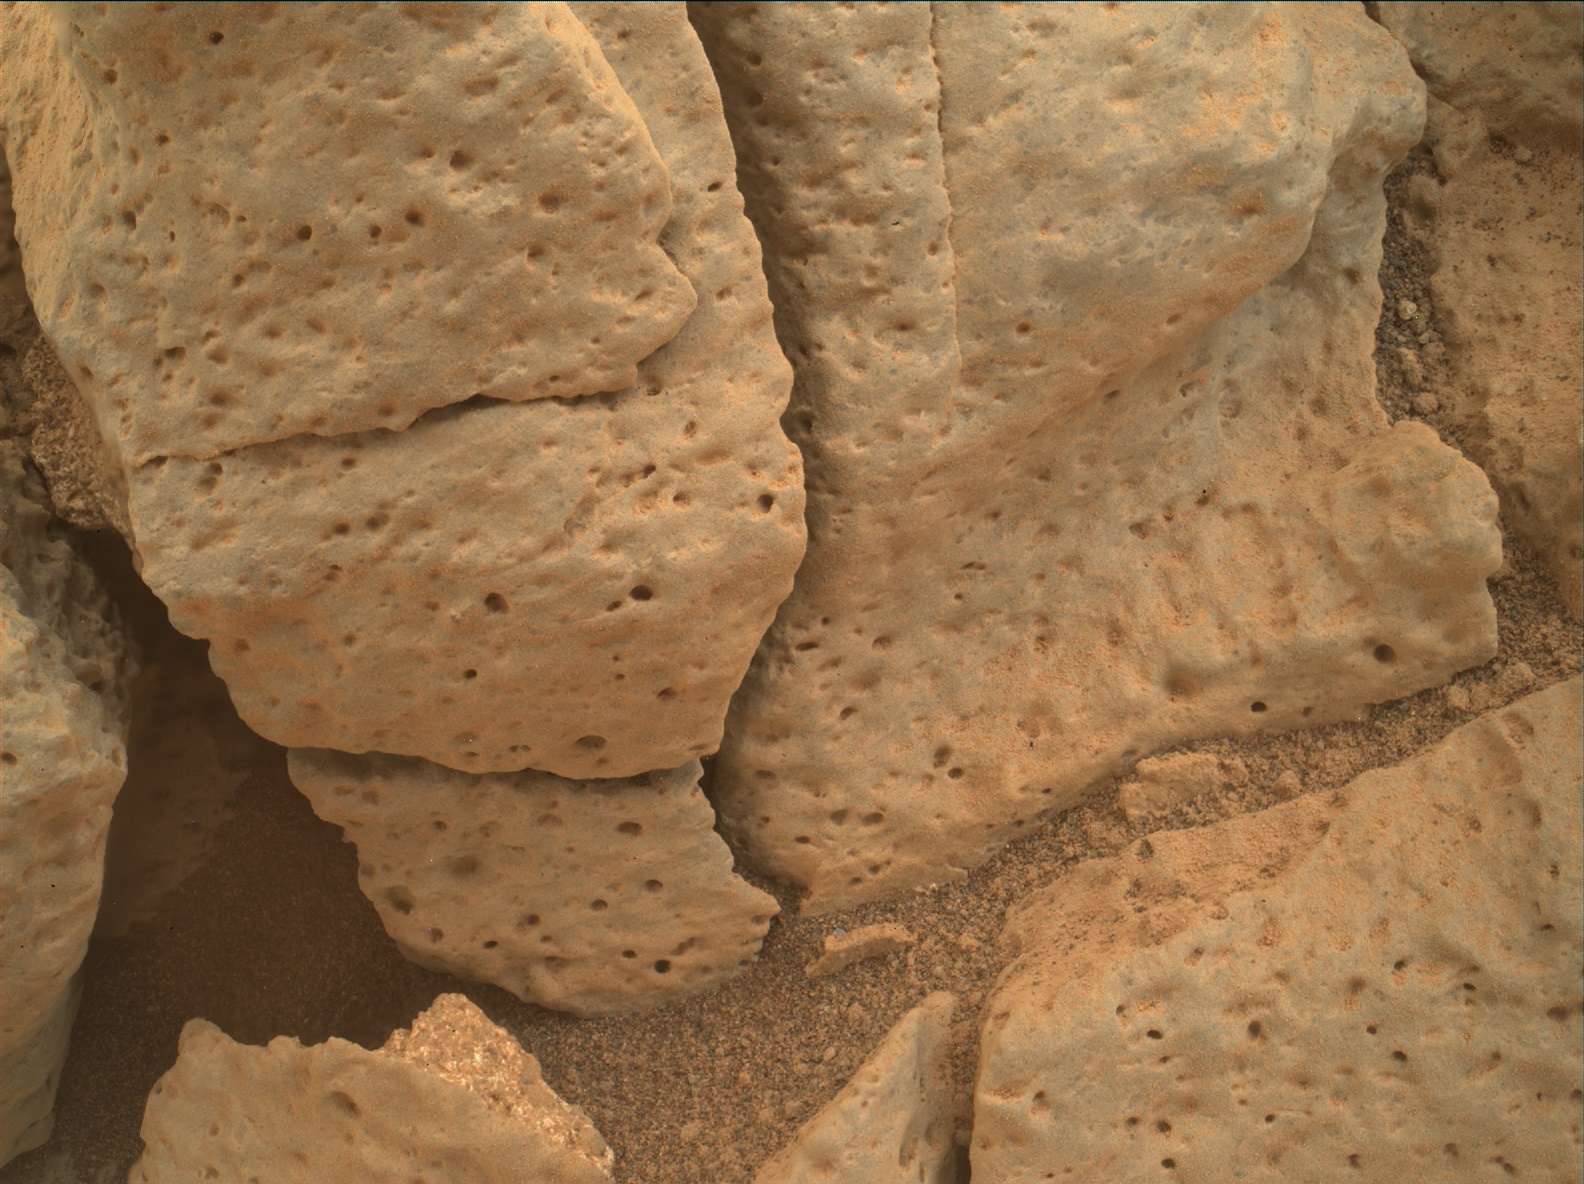 Nasa's Mars rover Curiosity acquired this image using its Mars Hand Lens Imager (MAHLI) on Sol 853